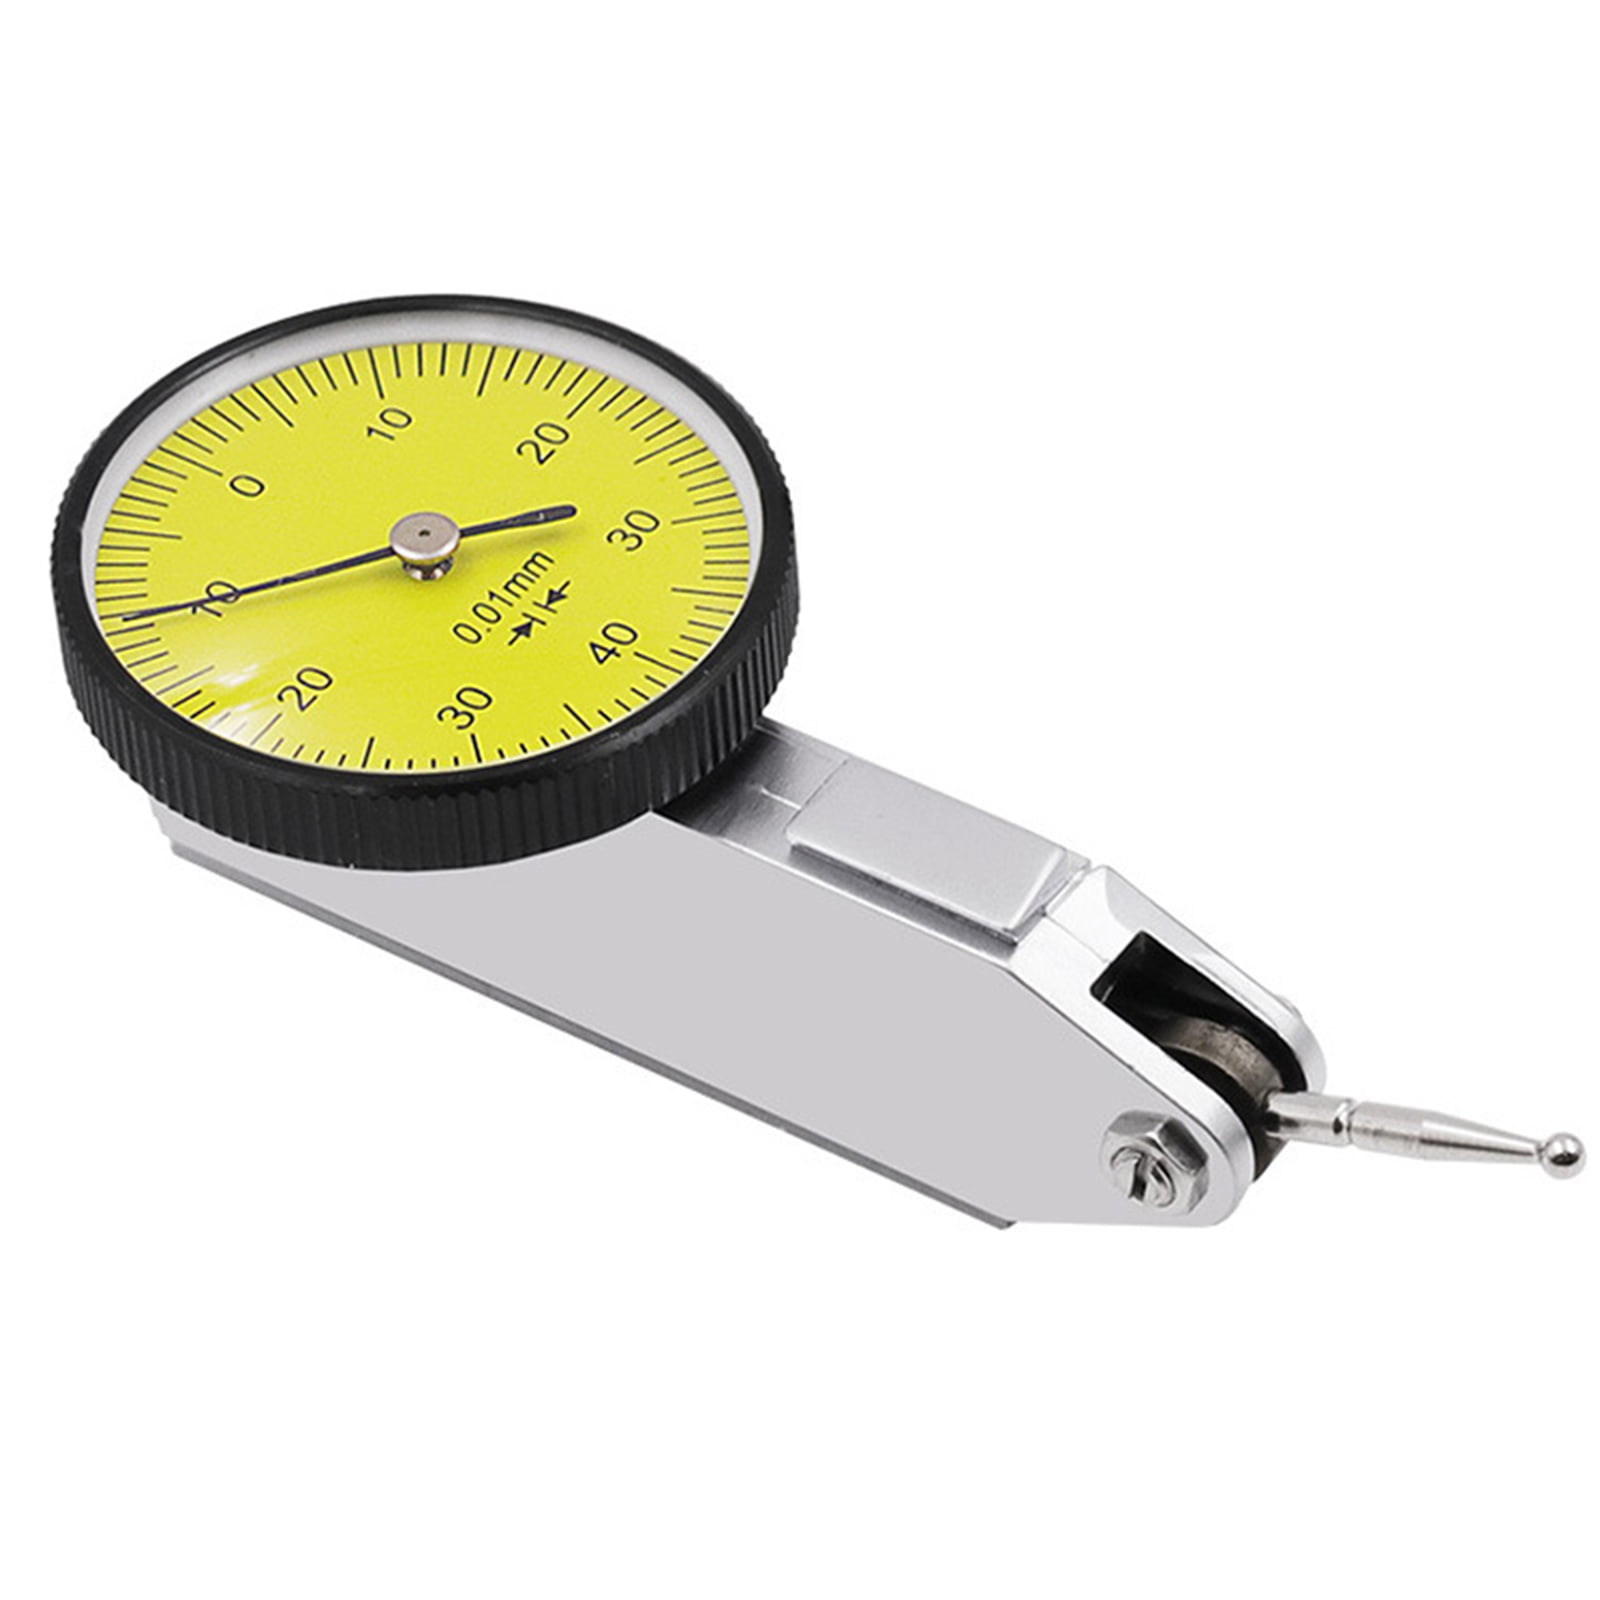 Dial Gauge Test Indicator Metric High Precision with Dovetail Rail 0-40-0 0.01mm 